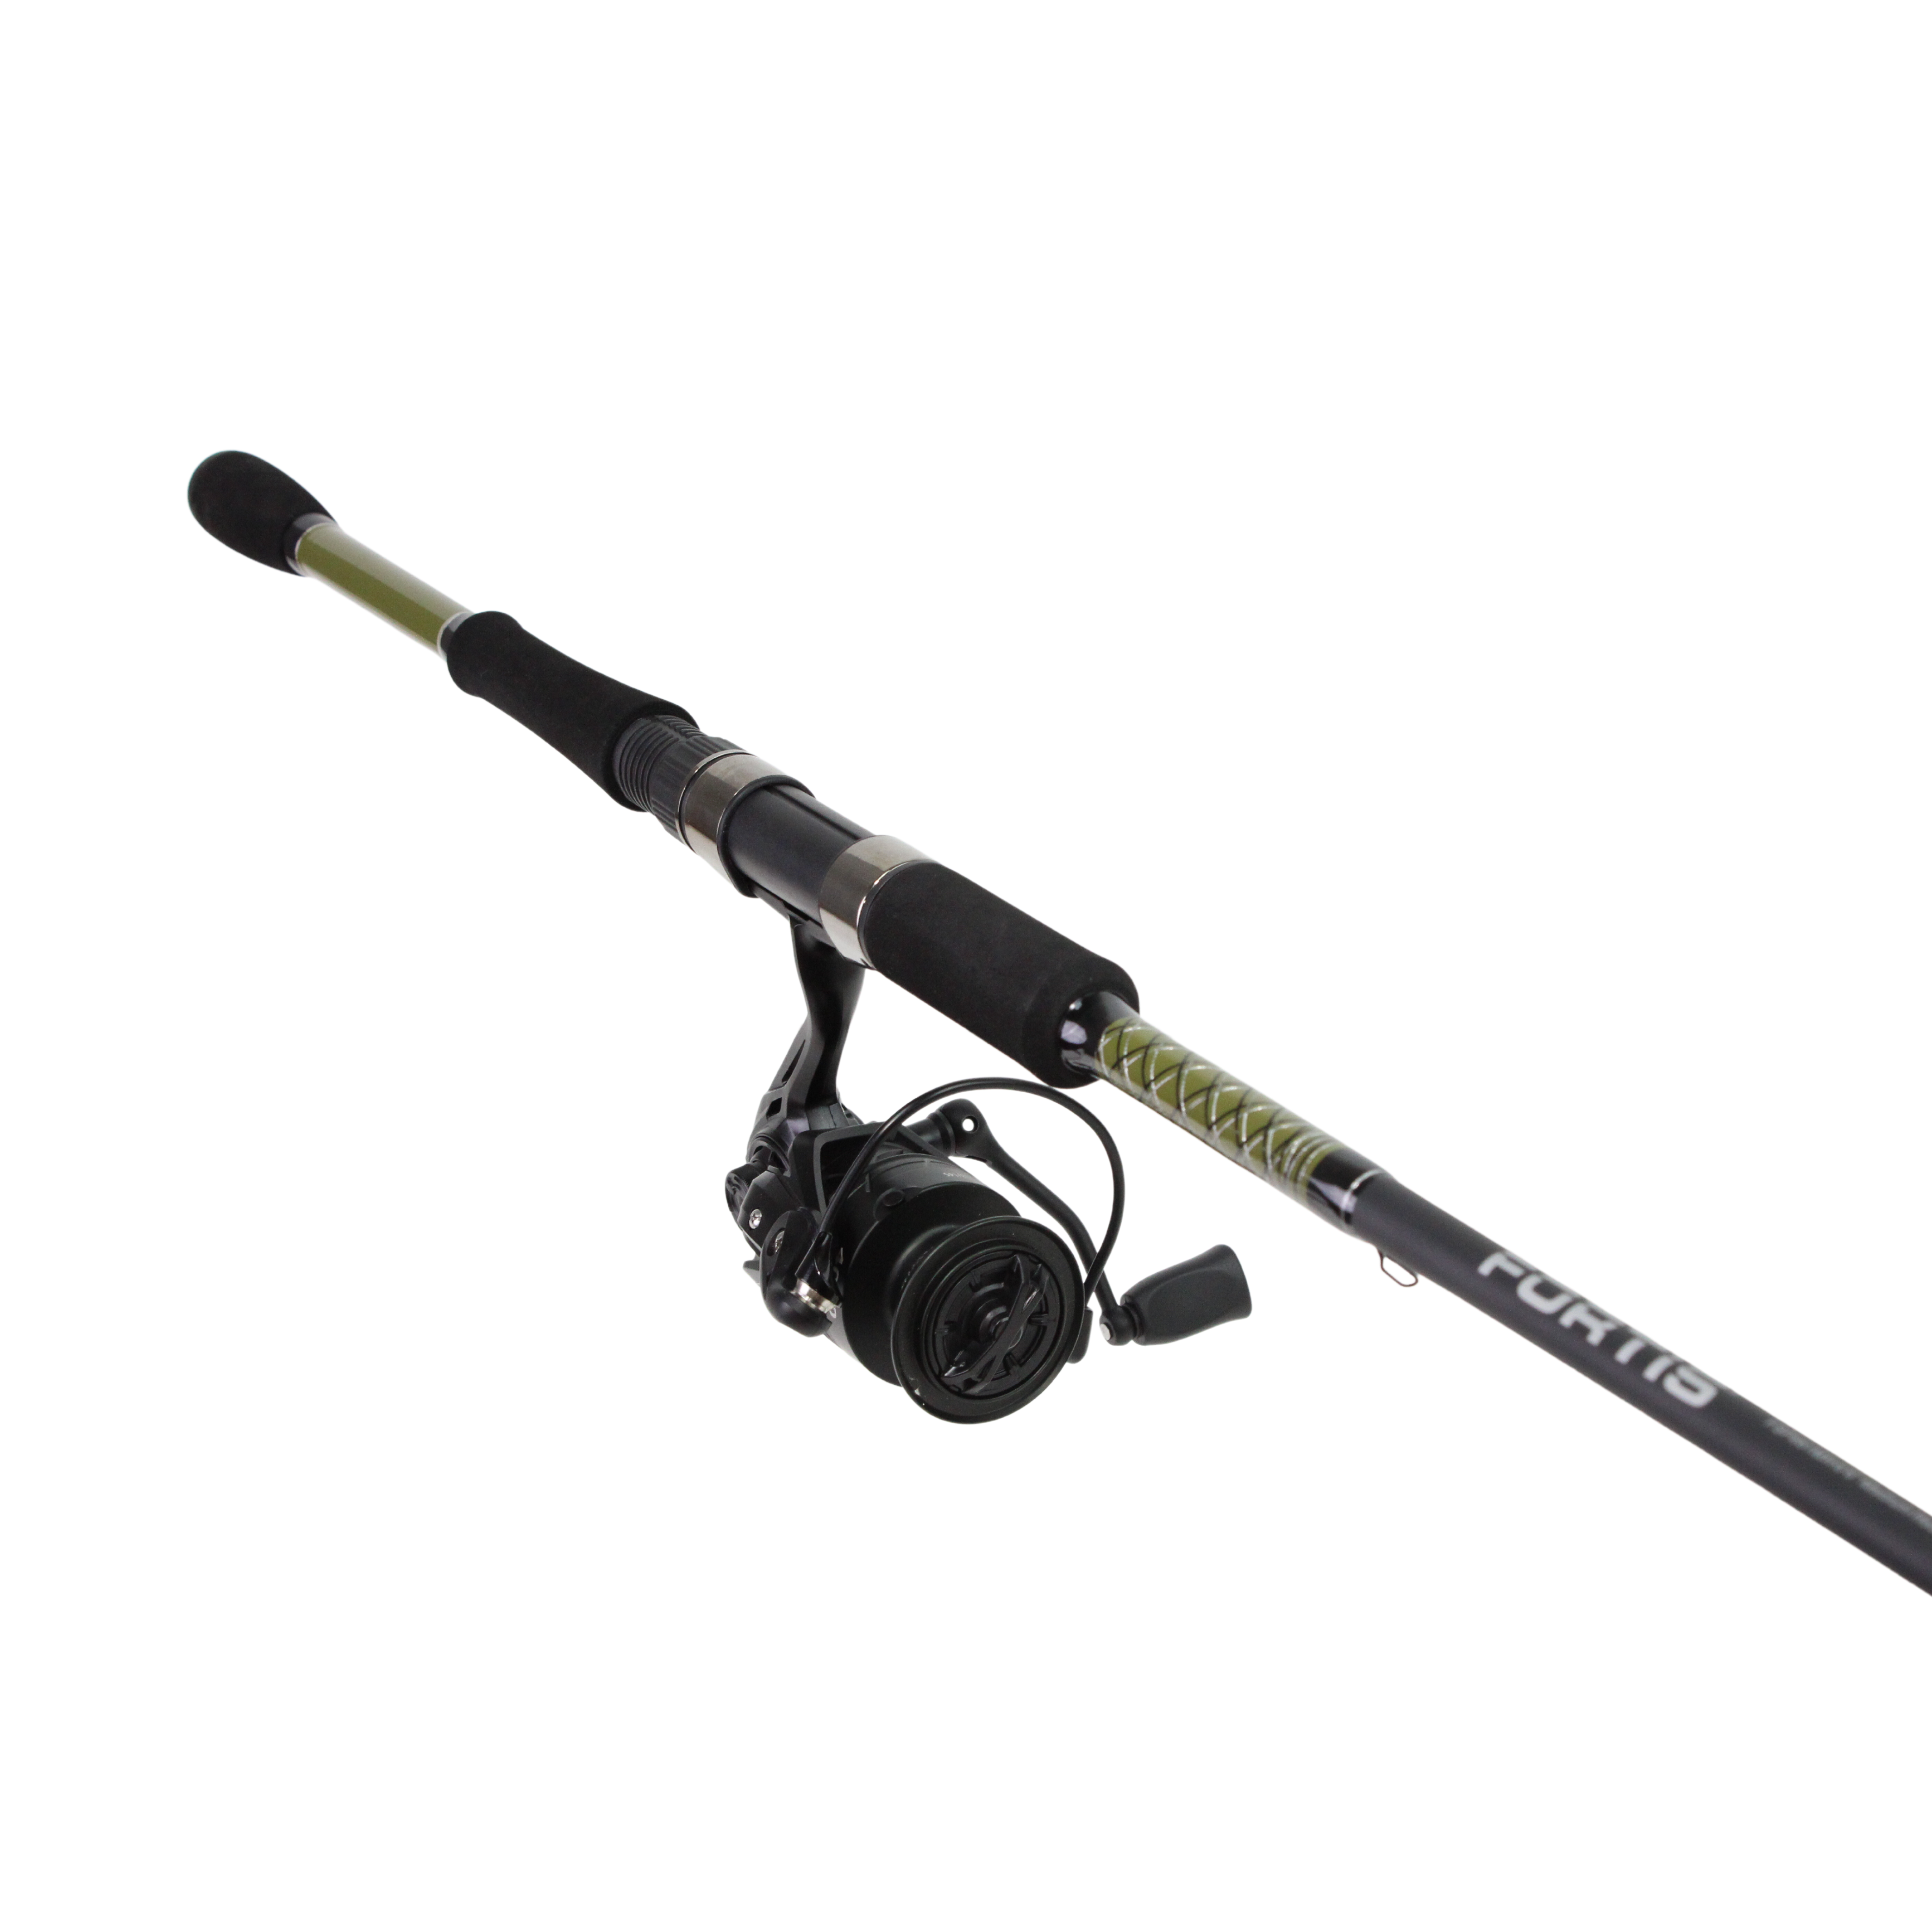 FORTIS 7' Medium Action 2 Piece Spinning Rod and 4000 Spinning Reel Package (FSP702M)